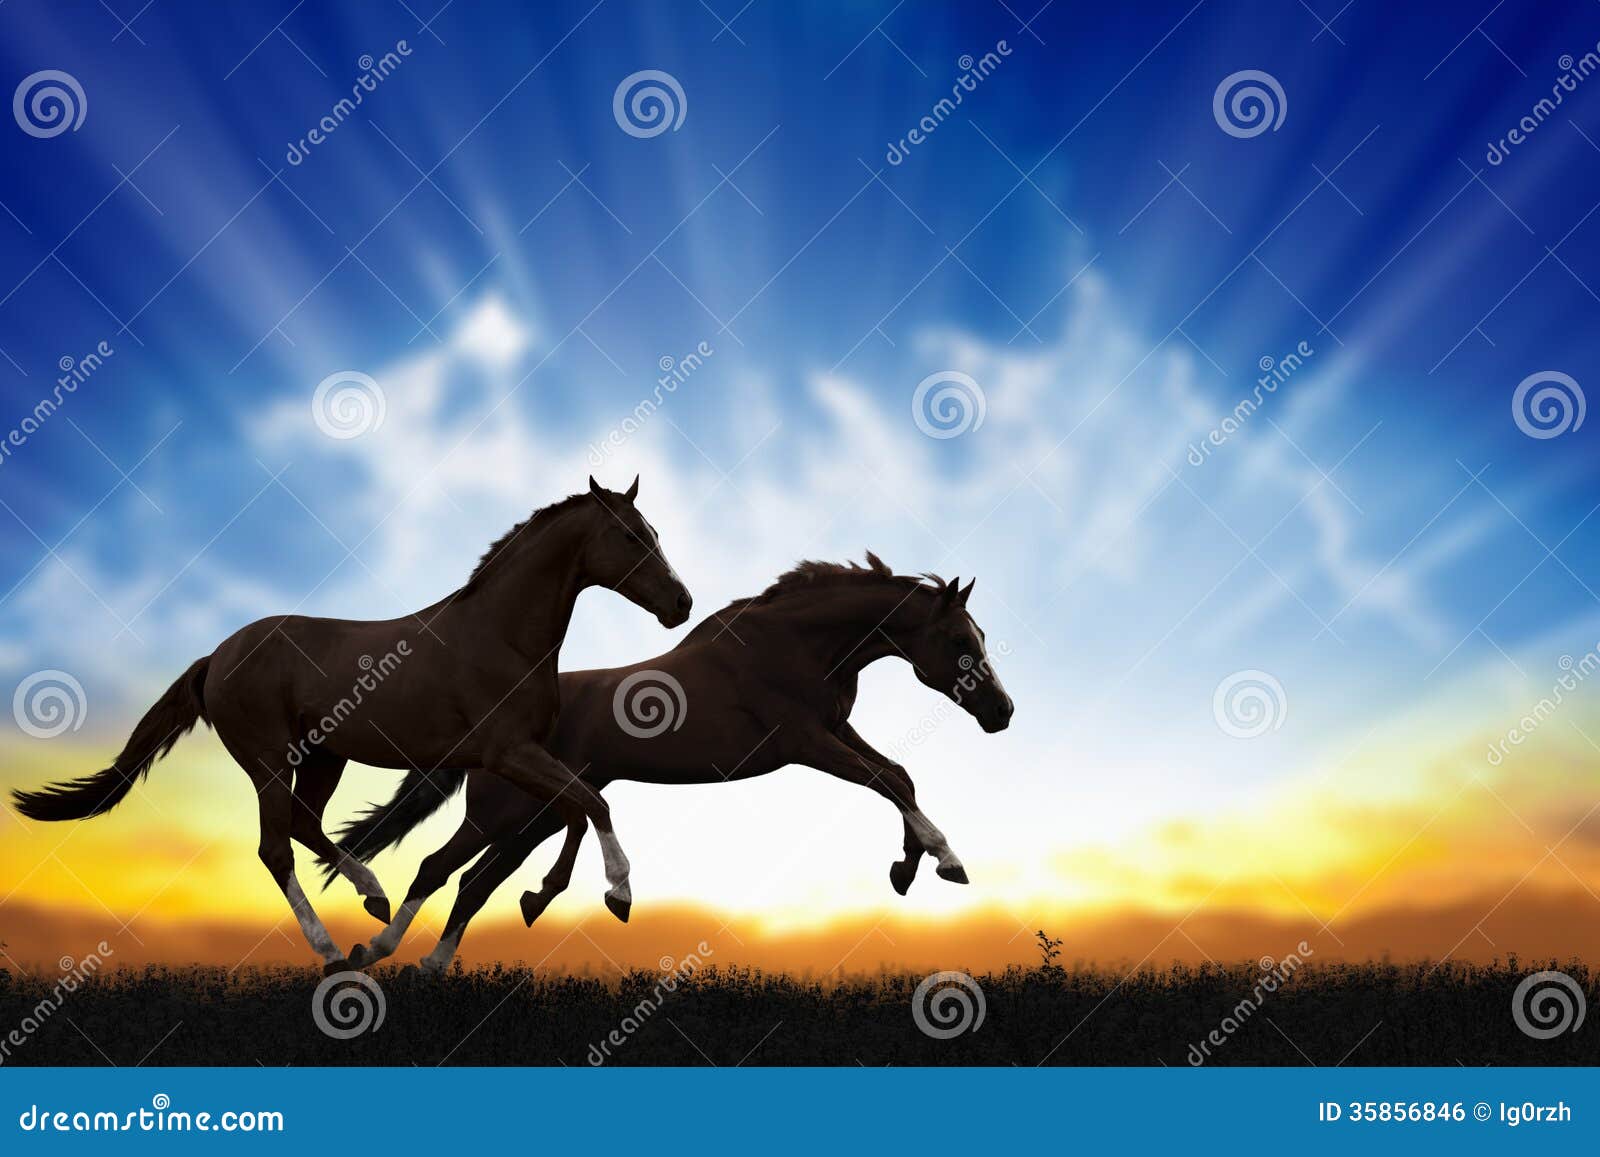 Two running horses stock photo. Image of light, jumping - 35856846